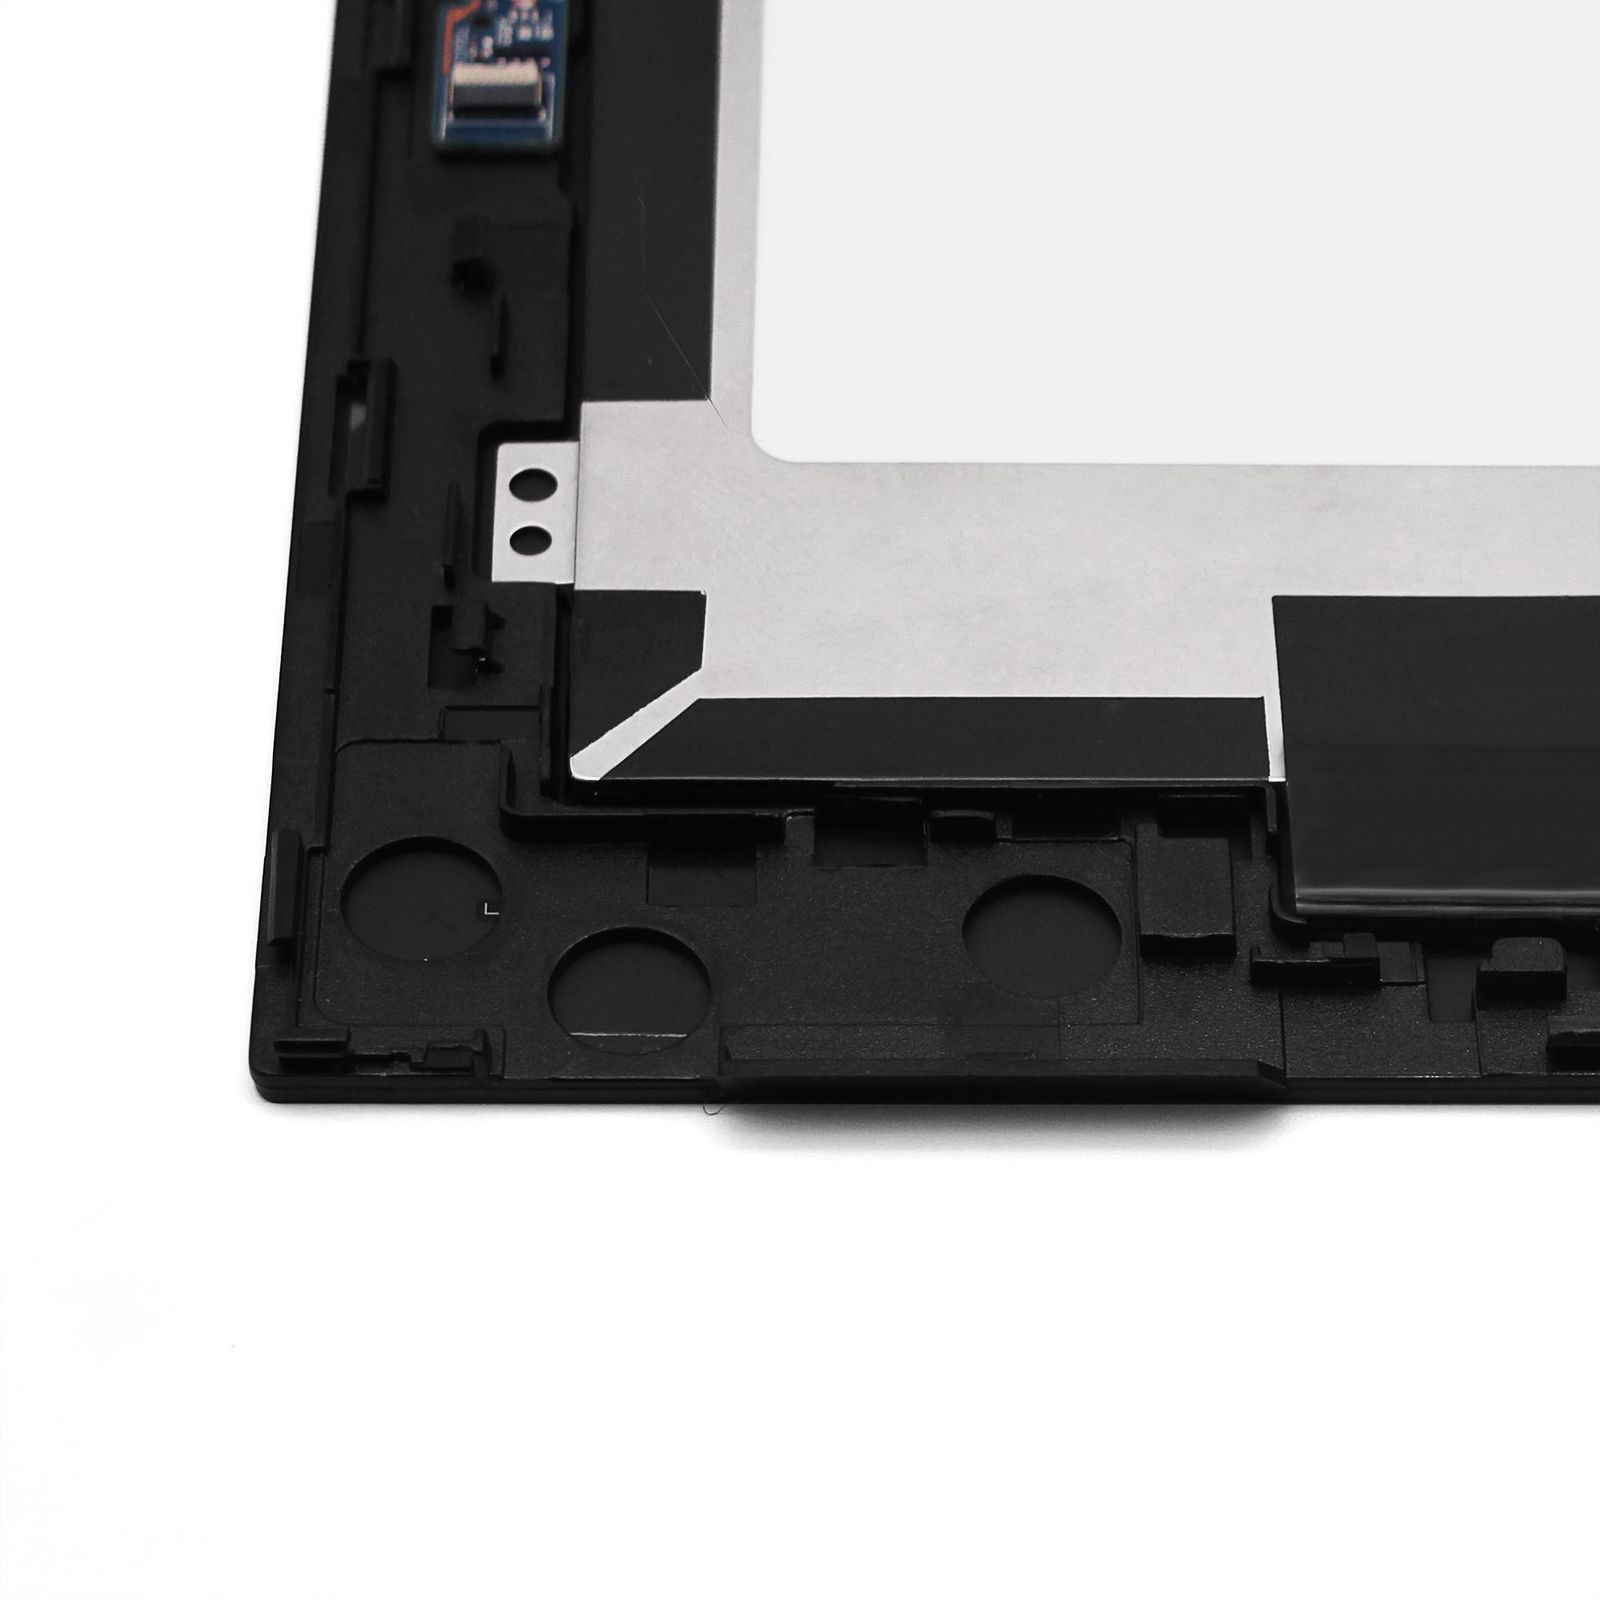 Screen Display Replacement For HP PAVILION 11-U052TU LCD Touch Digitizer Assembly